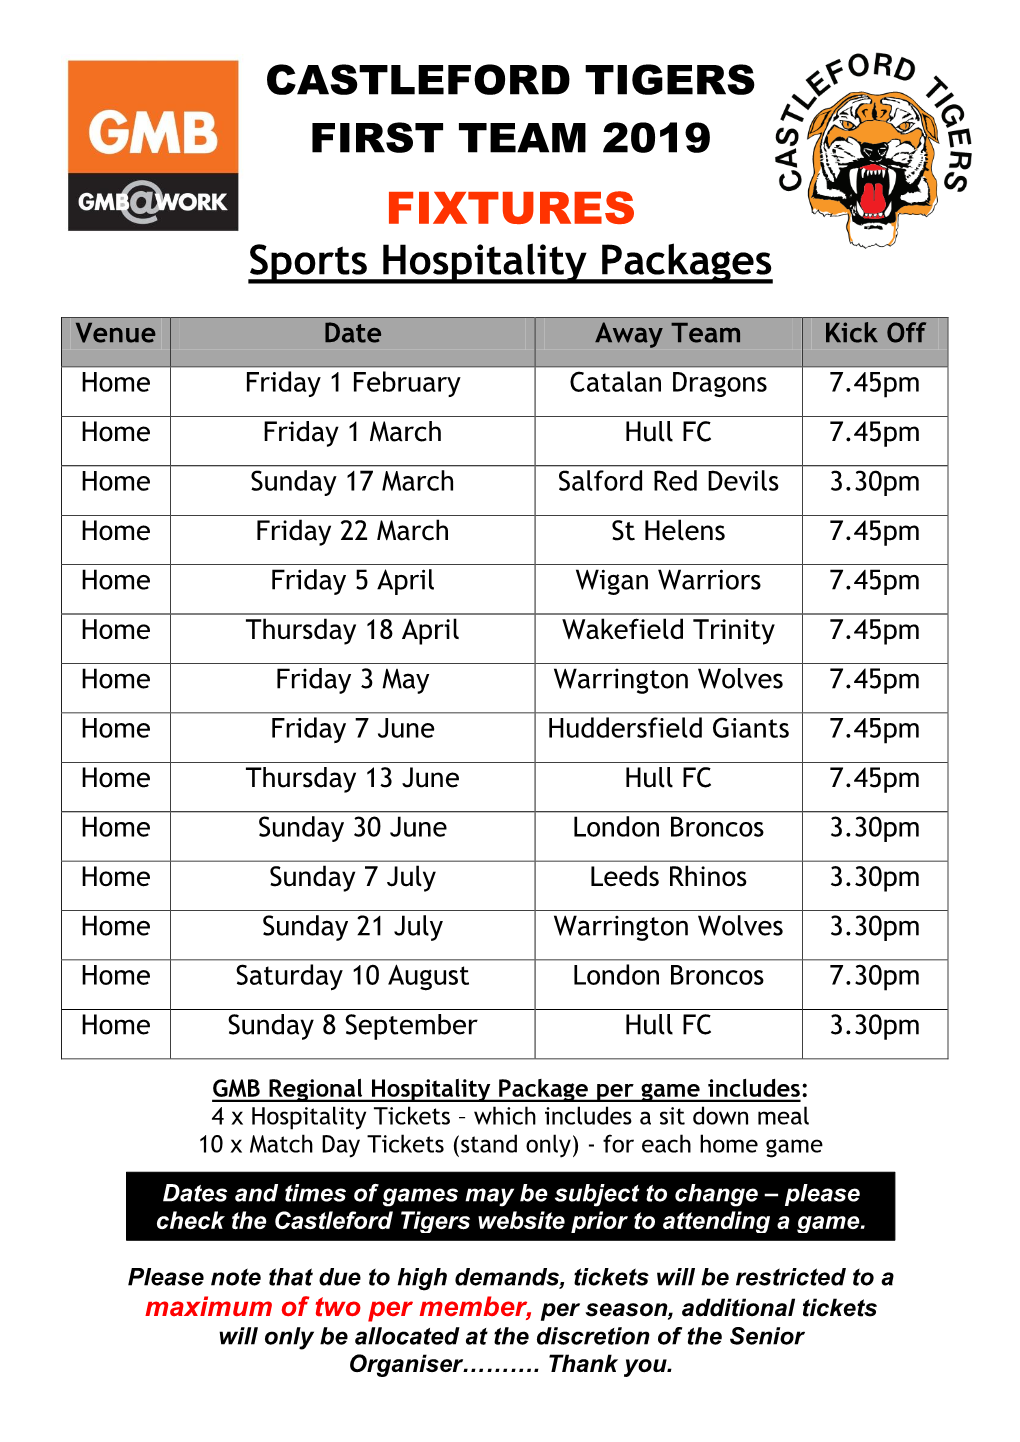 FIXTURES Sports Hospitality Packages